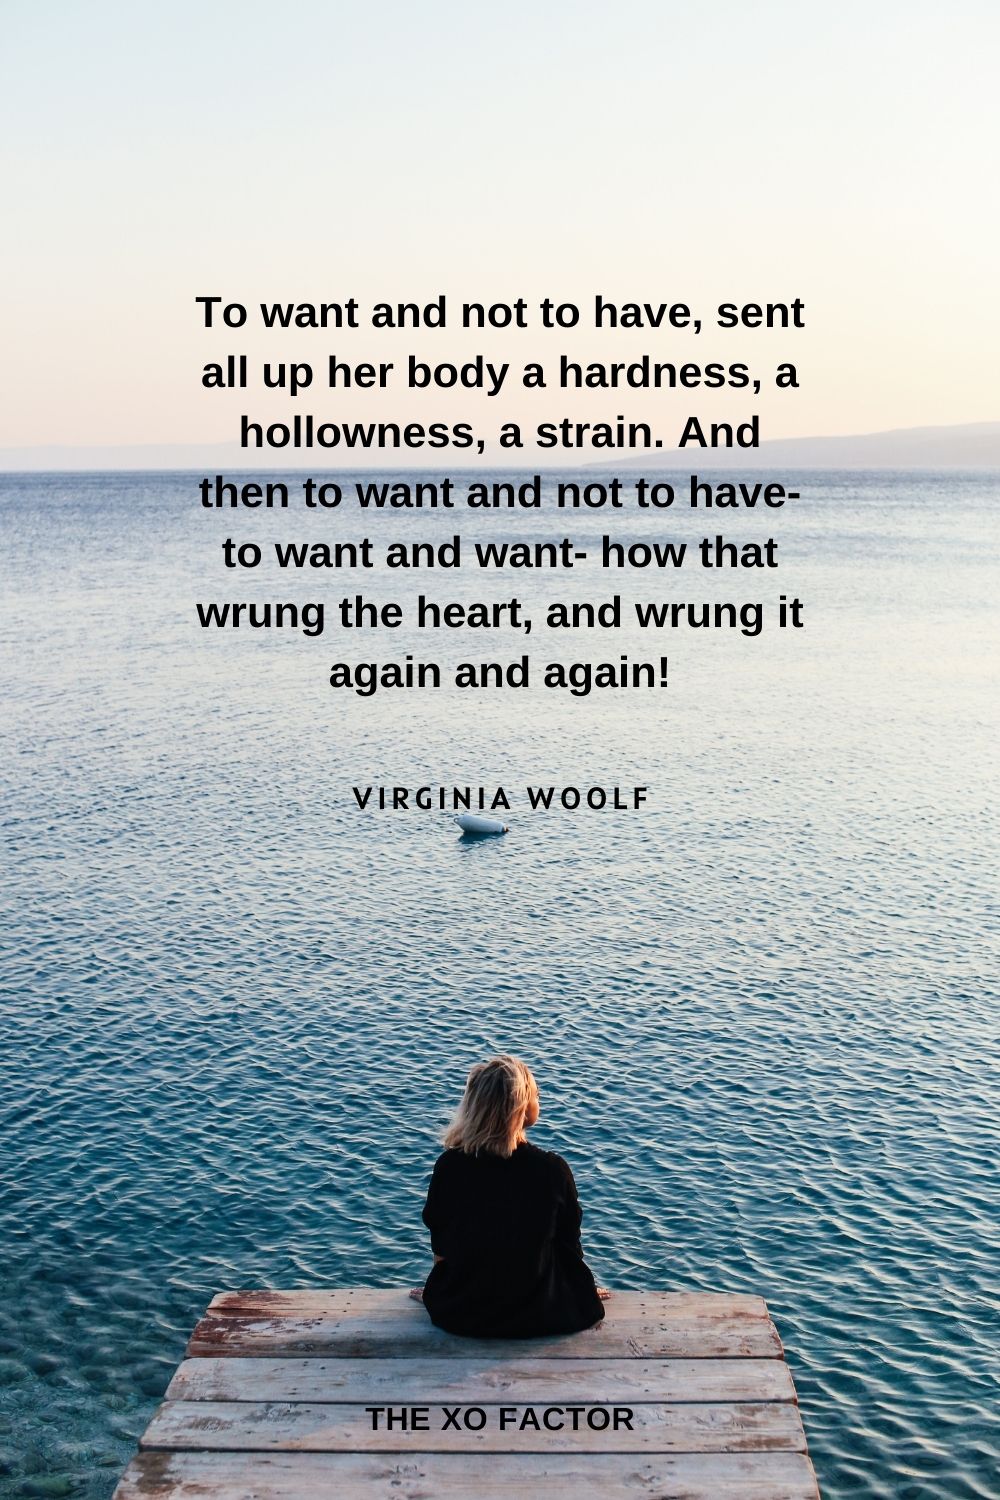 To want and not to have, sent all up her body a hardness, a hollowness, a strain. And then to want and not to have- to want and want- how that wrung the heart, and wrung it again and again! Virginia Woolf